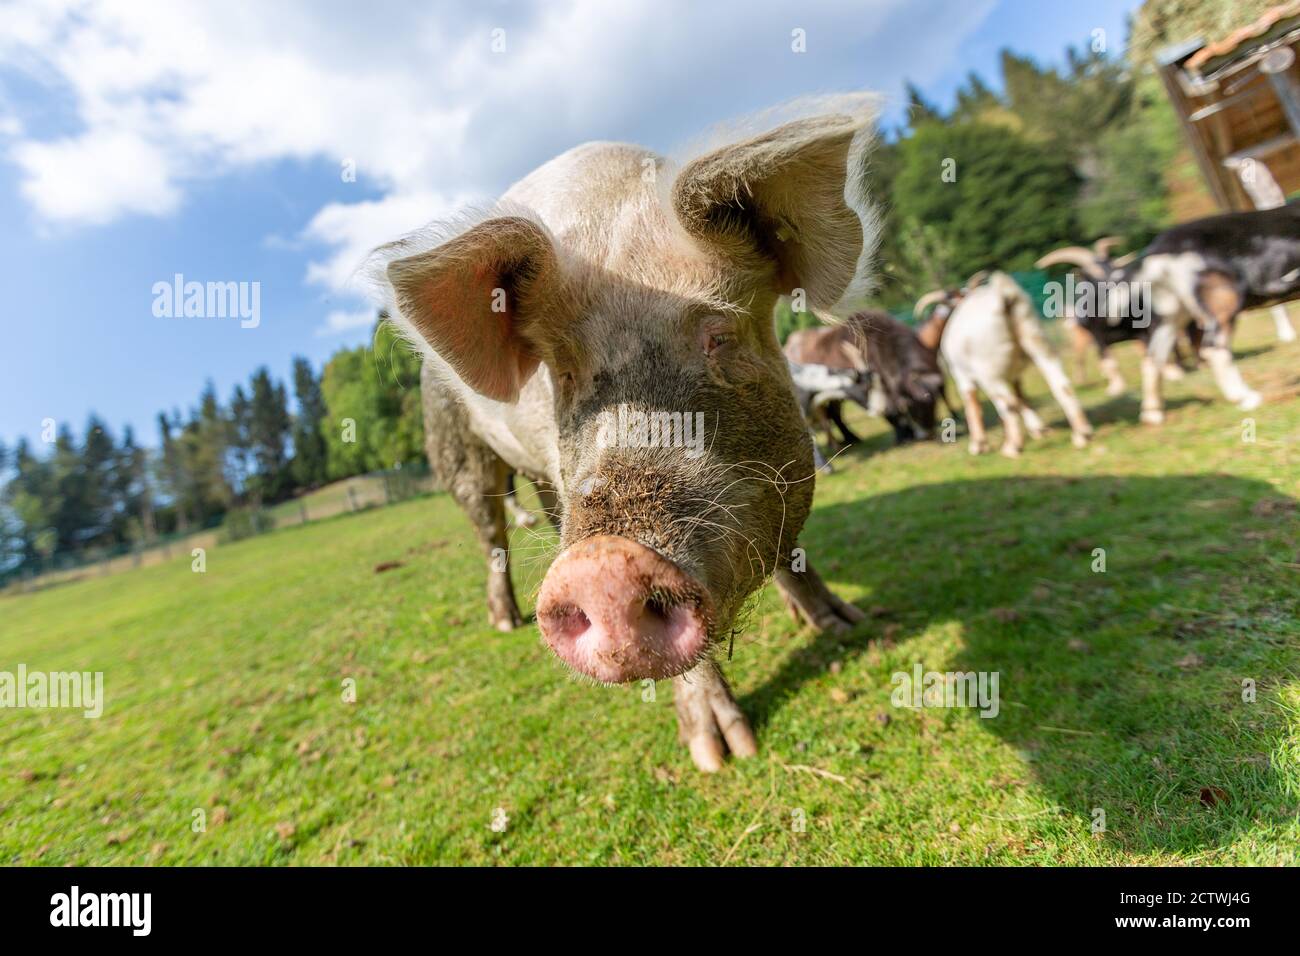 Portrait of a pig at a farm Stock Photo